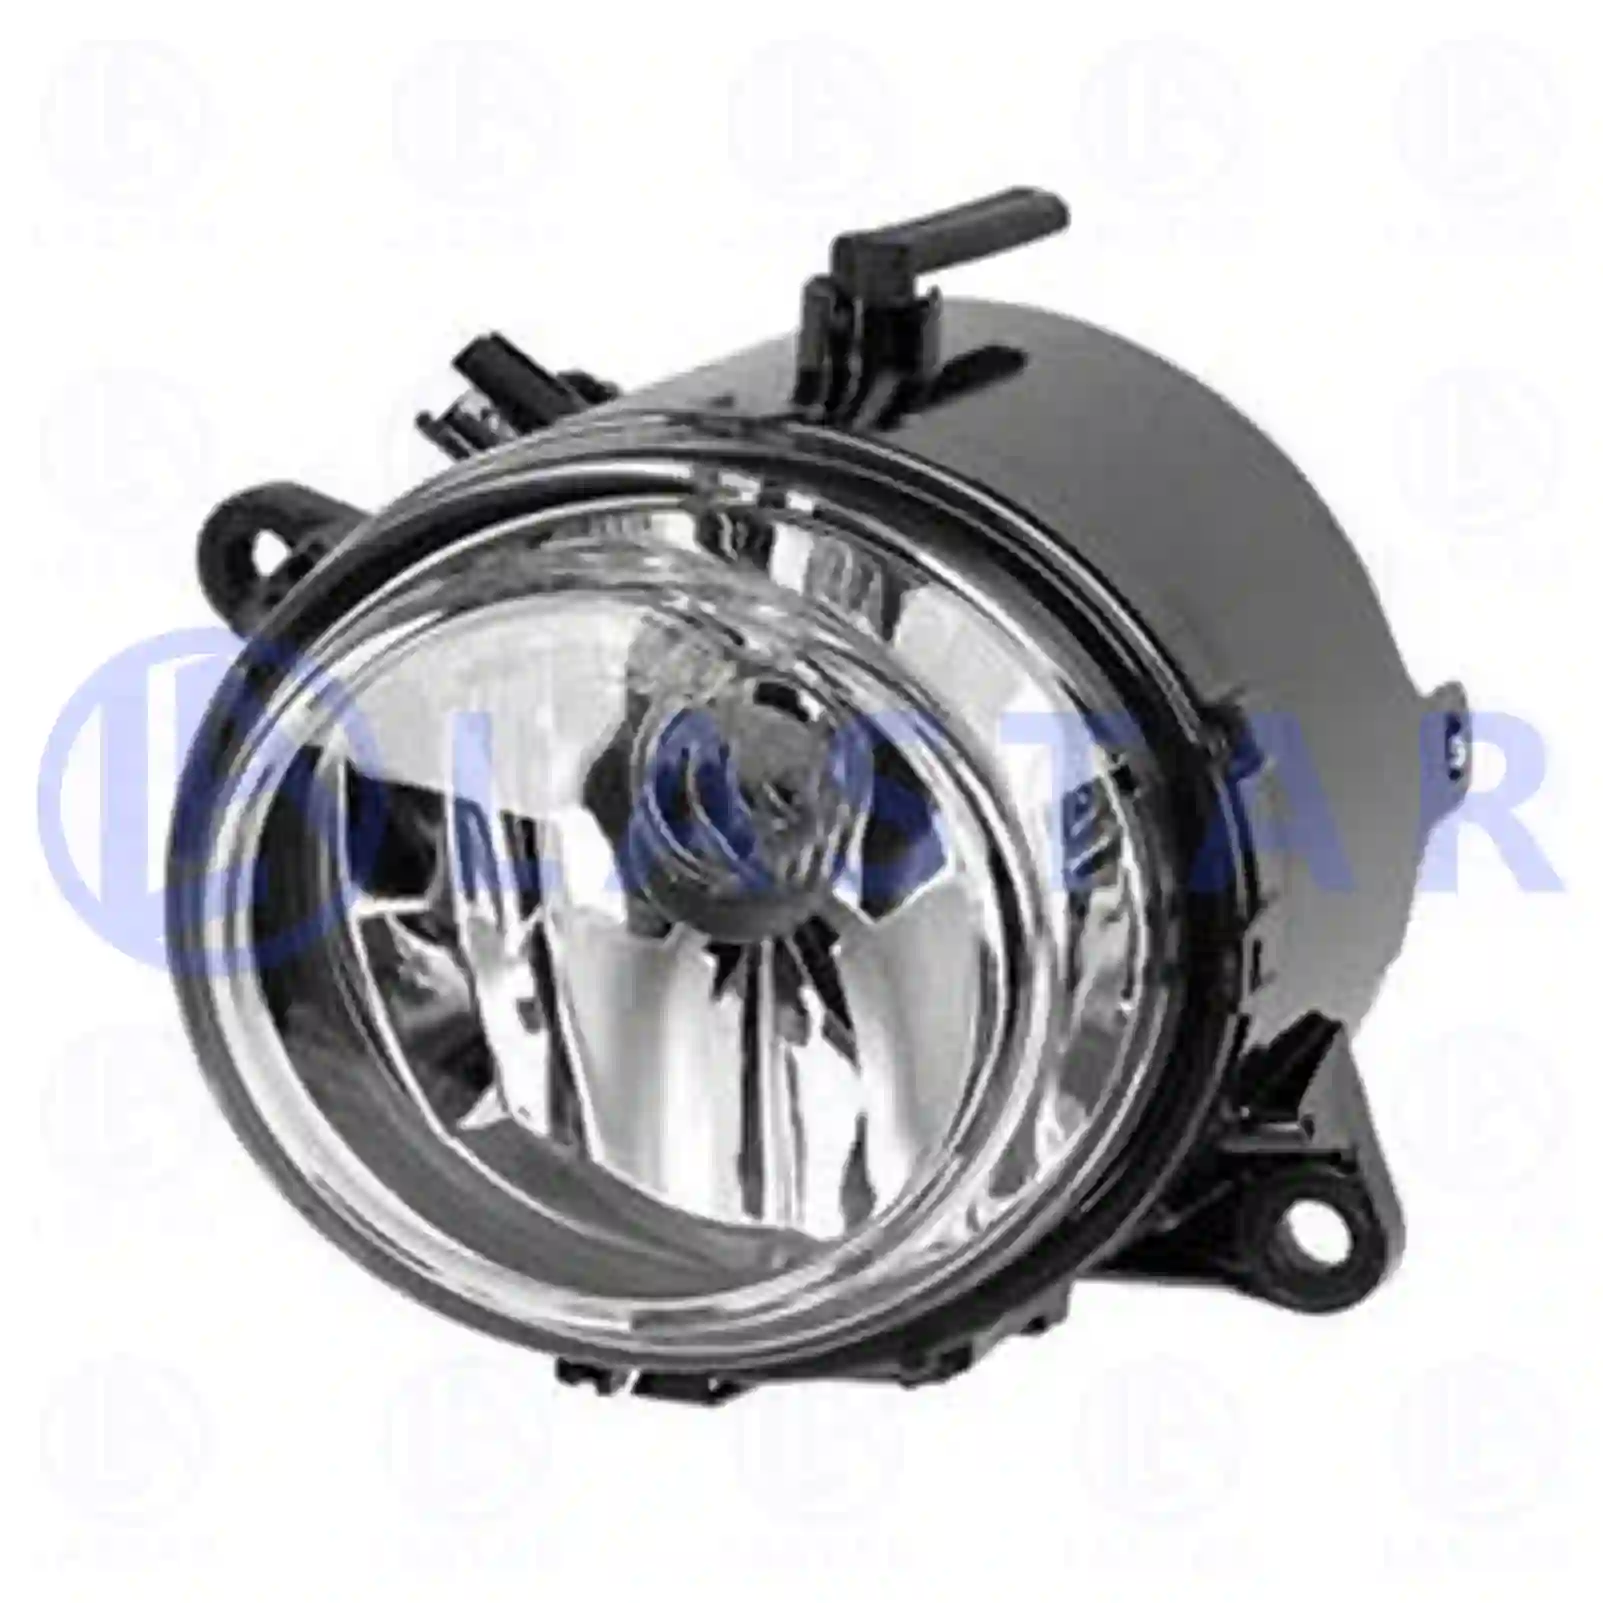 Fog lamp, right, without bulbs, 77711928, 9608200556, ZG20432-0008, ||  77711928 Lastar Spare Part | Truck Spare Parts, Auotomotive Spare Parts Fog lamp, right, without bulbs, 77711928, 9608200556, ZG20432-0008, ||  77711928 Lastar Spare Part | Truck Spare Parts, Auotomotive Spare Parts